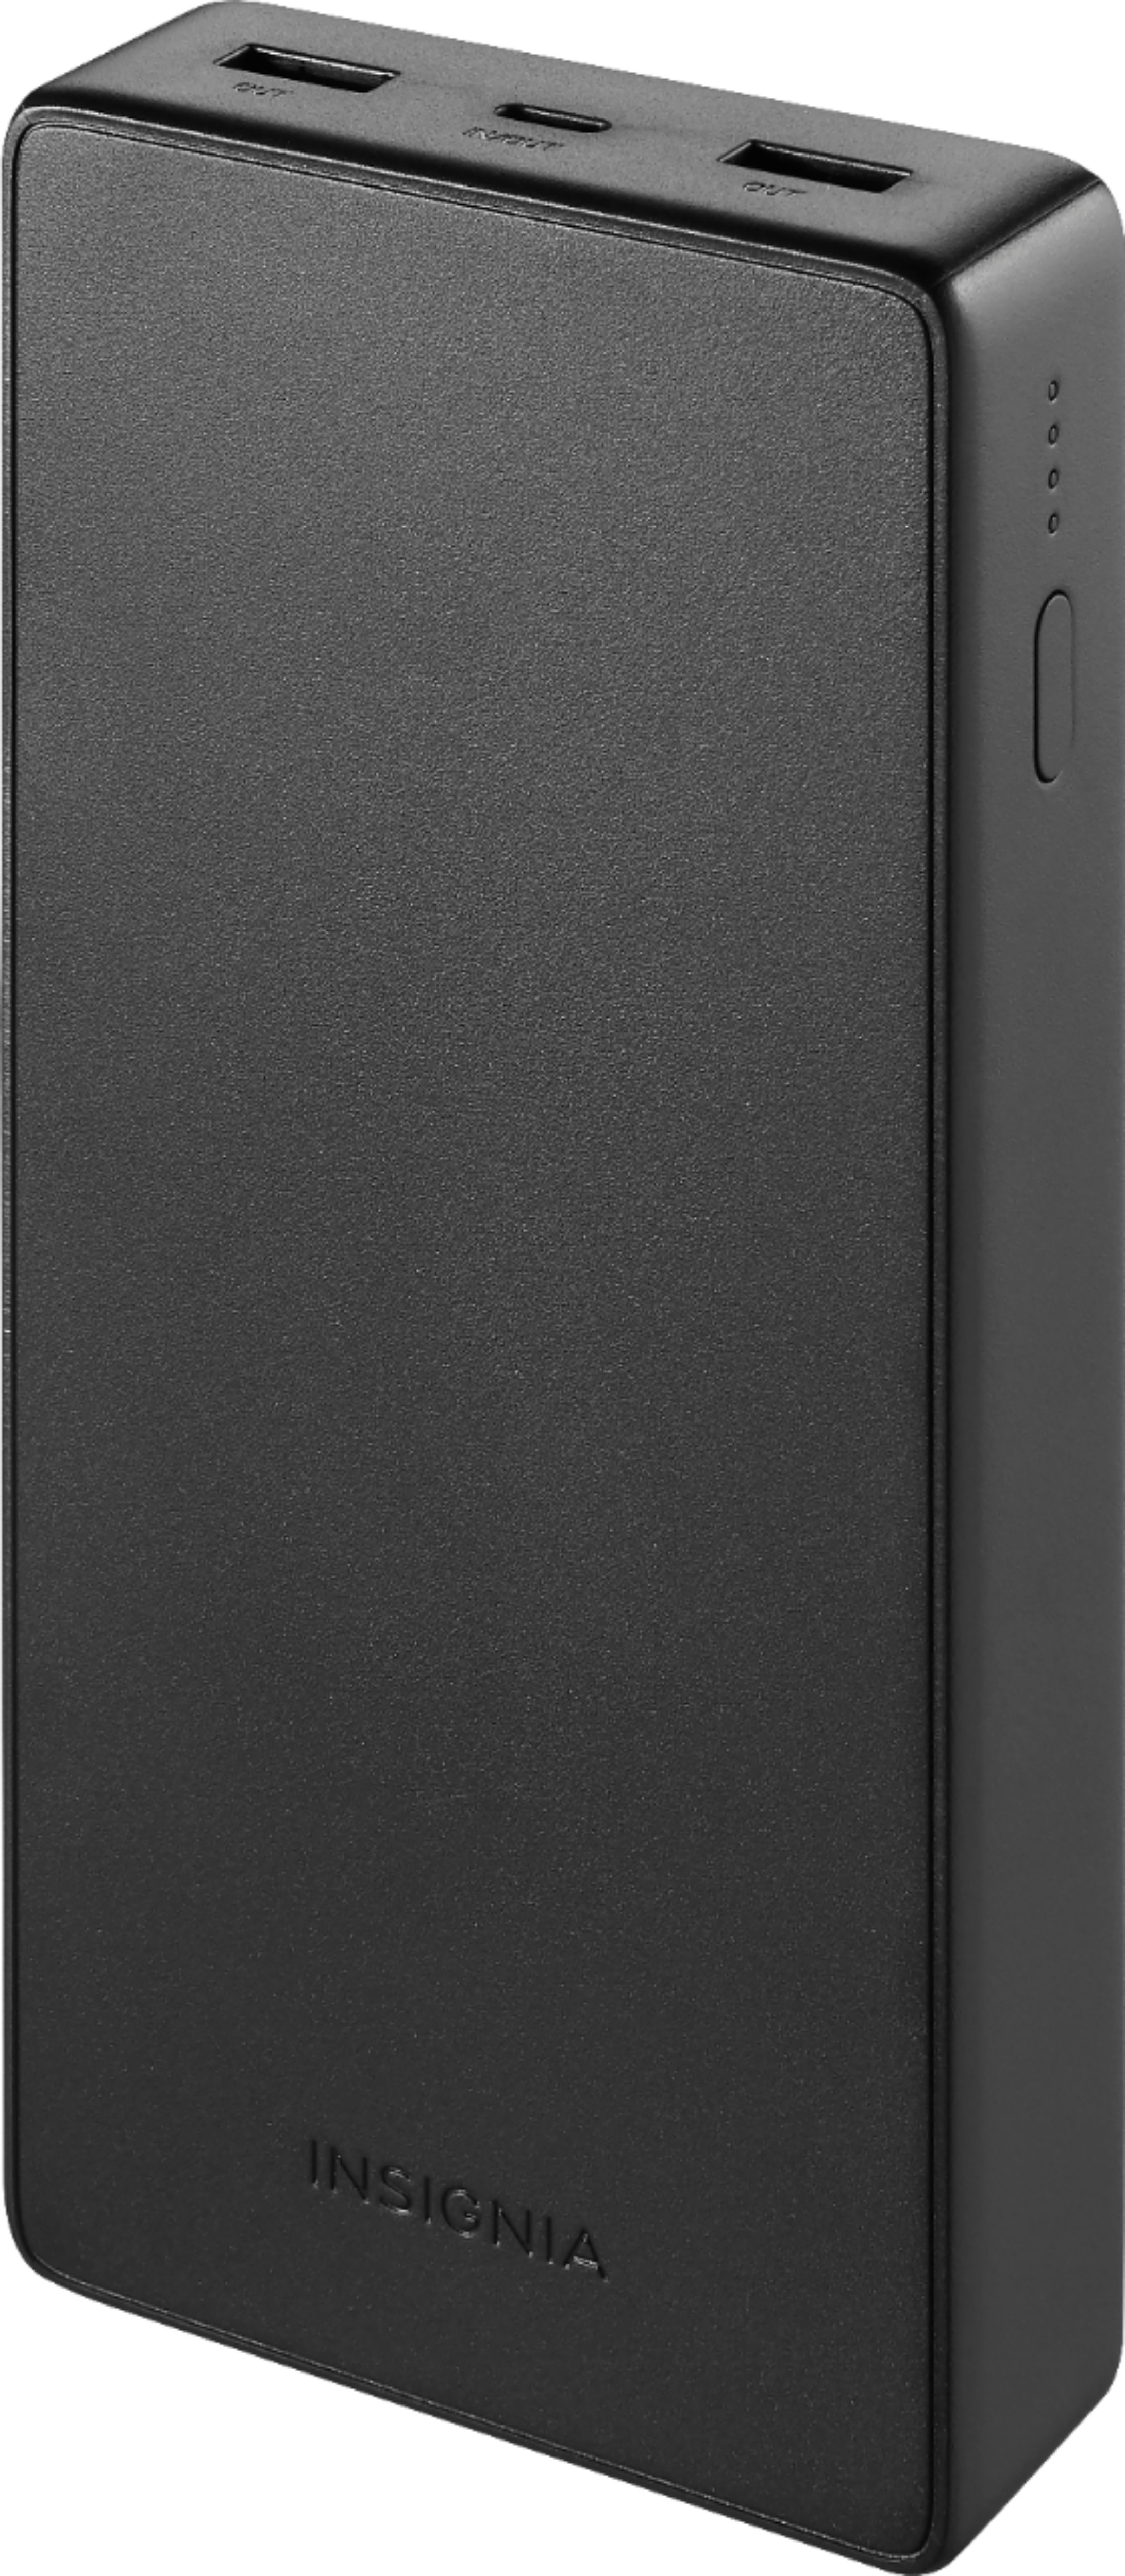 Angle View: Energizer - MAX 10,000mAh Ultra-Slim High Speed Universal Portable Charger for Apple, Android, Google, Samsung & USB Enabled Devices - Black